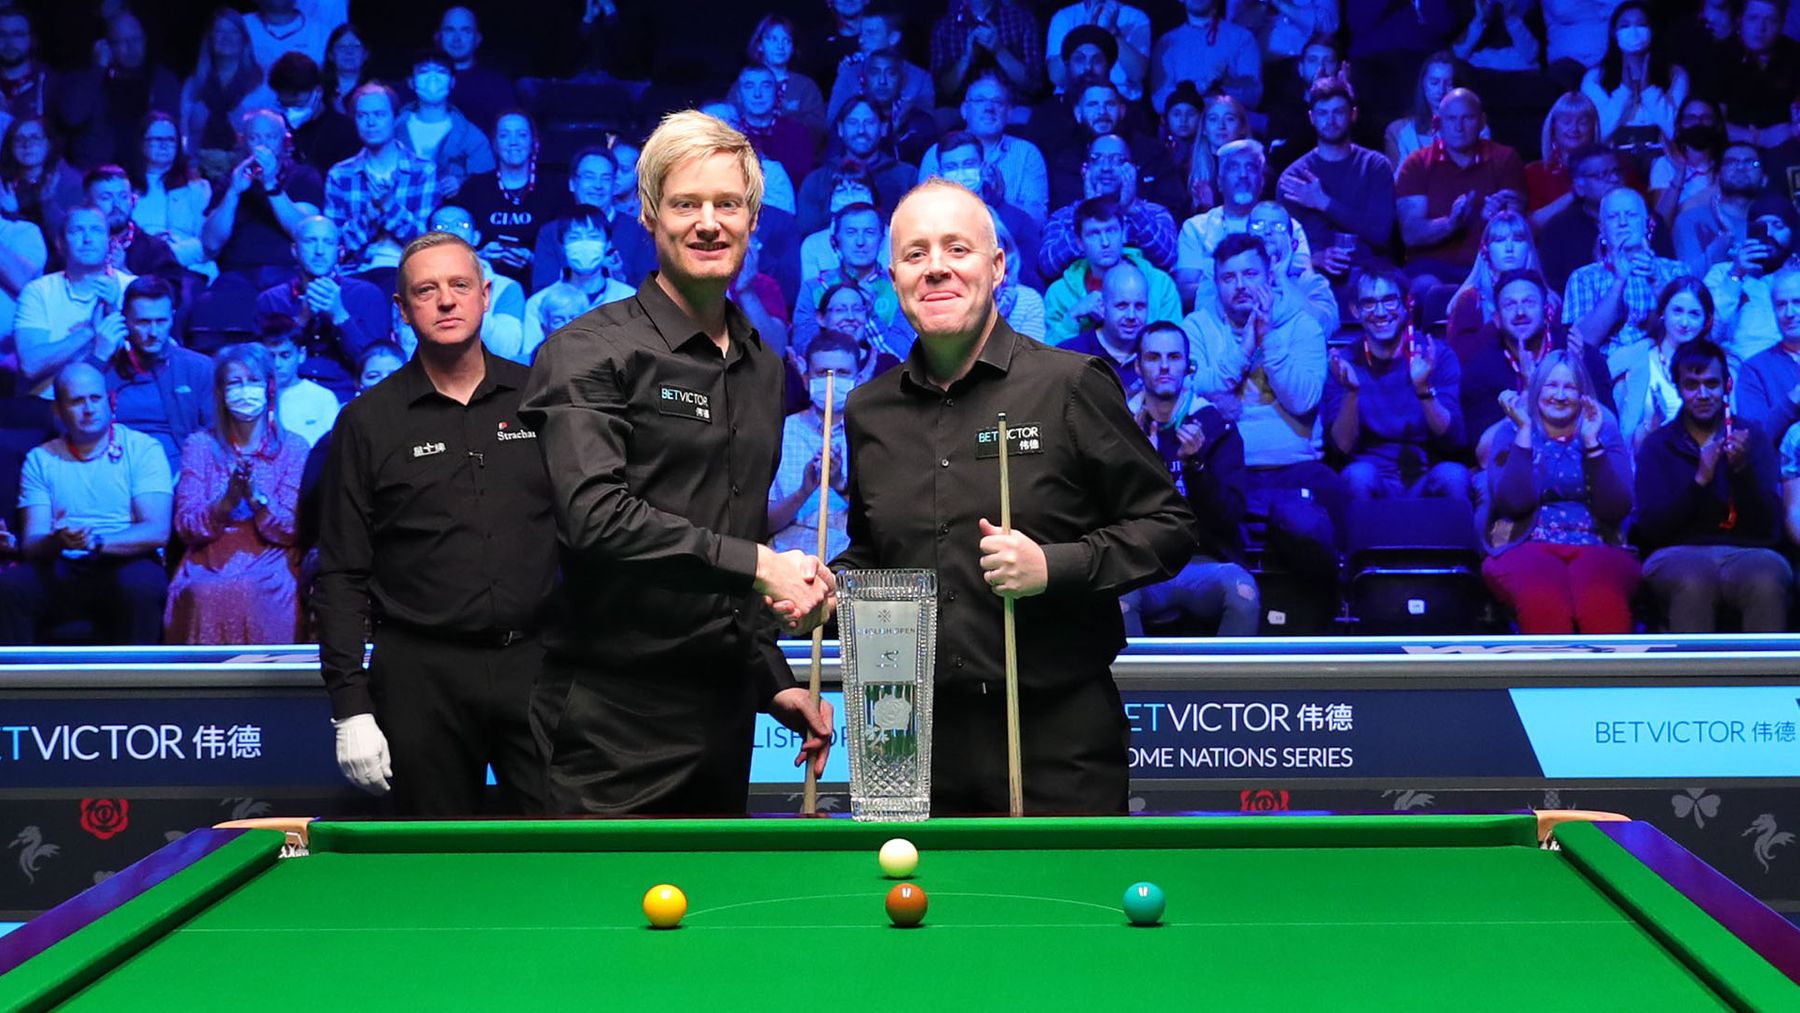 Snooker results Neil Robertson atones for last year by winning epic final 9-8